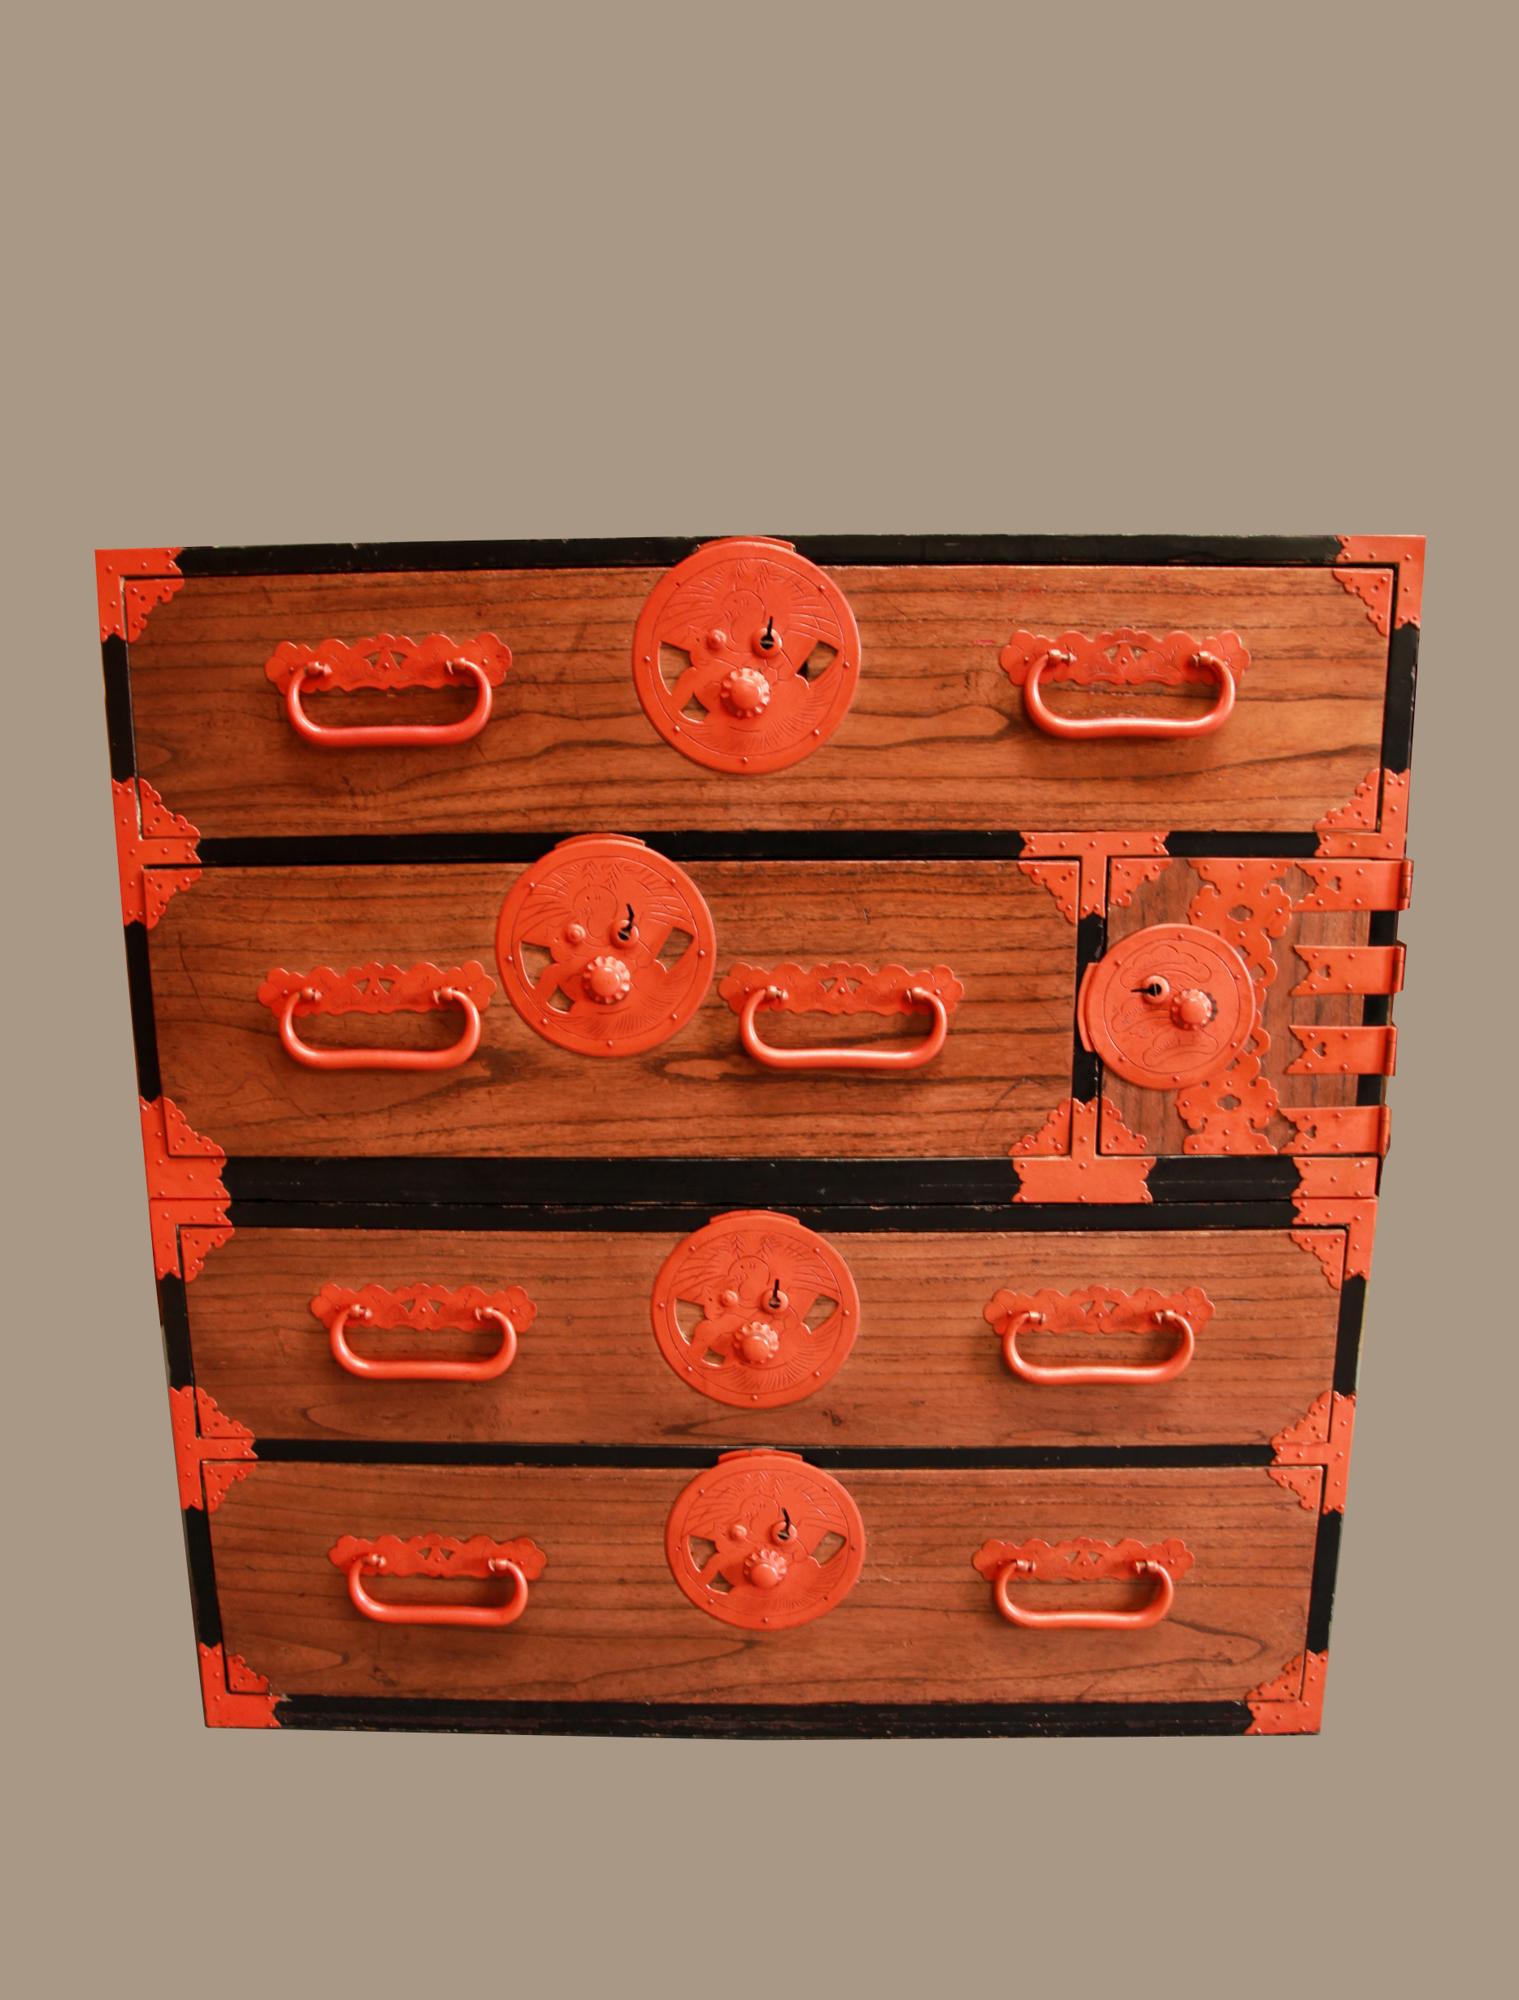 Japanese two section Tohoku Kasane Tansu, Meiji, late 19th century.

Drawers are light colored Kiri wood with hand forged metal hardware in vermillion finish. One section has a compartment with doors and two small drawers inside. Sides and back